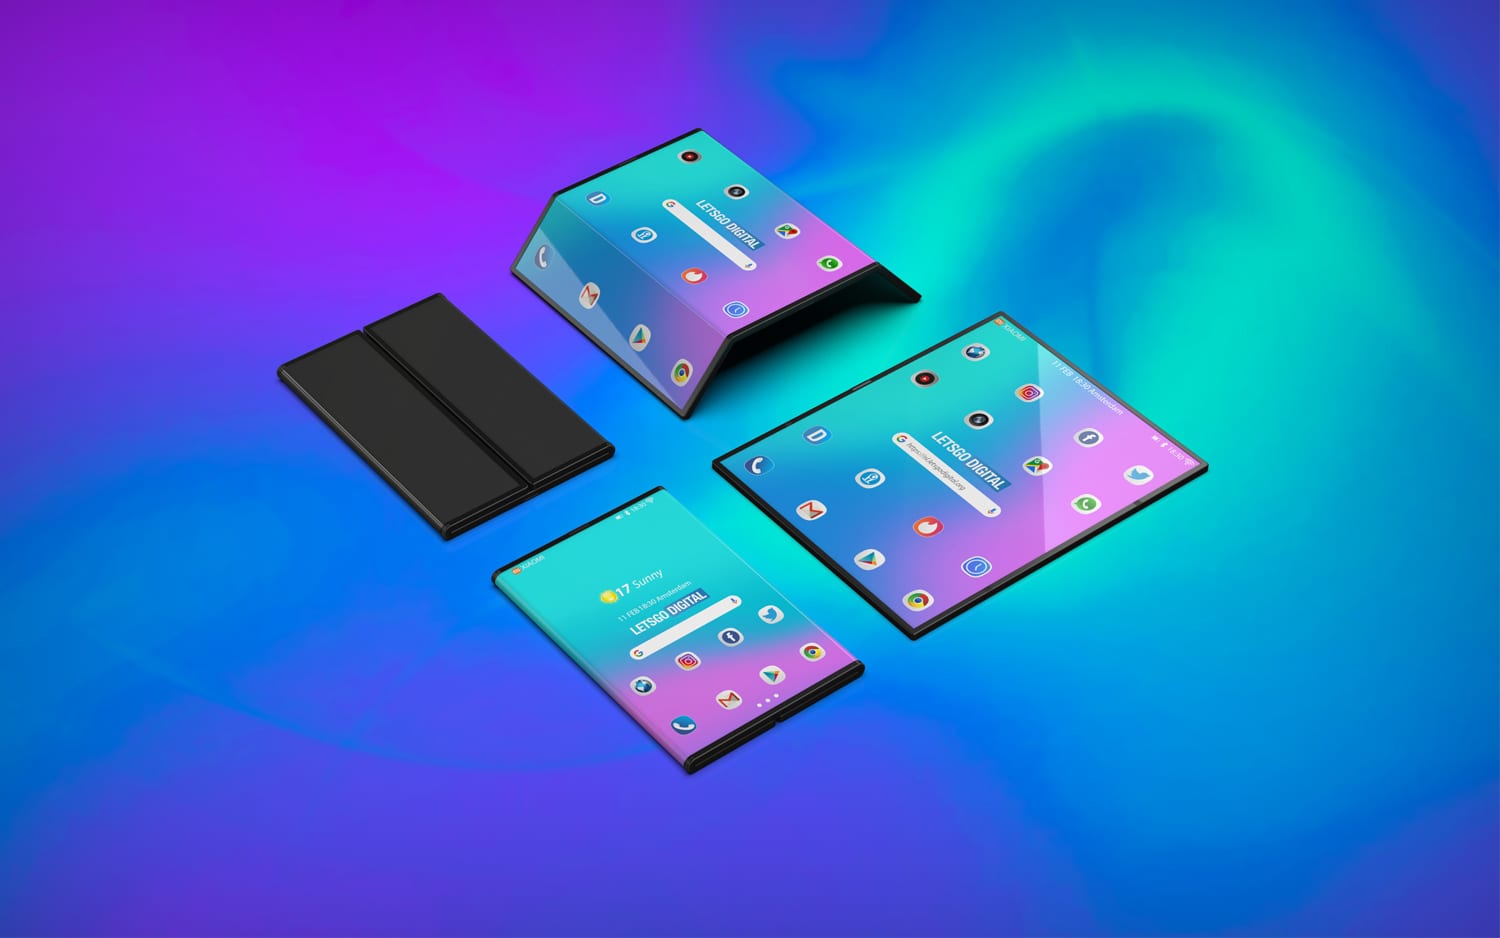 Foldable Smartphones Price will significantly drop by 2021